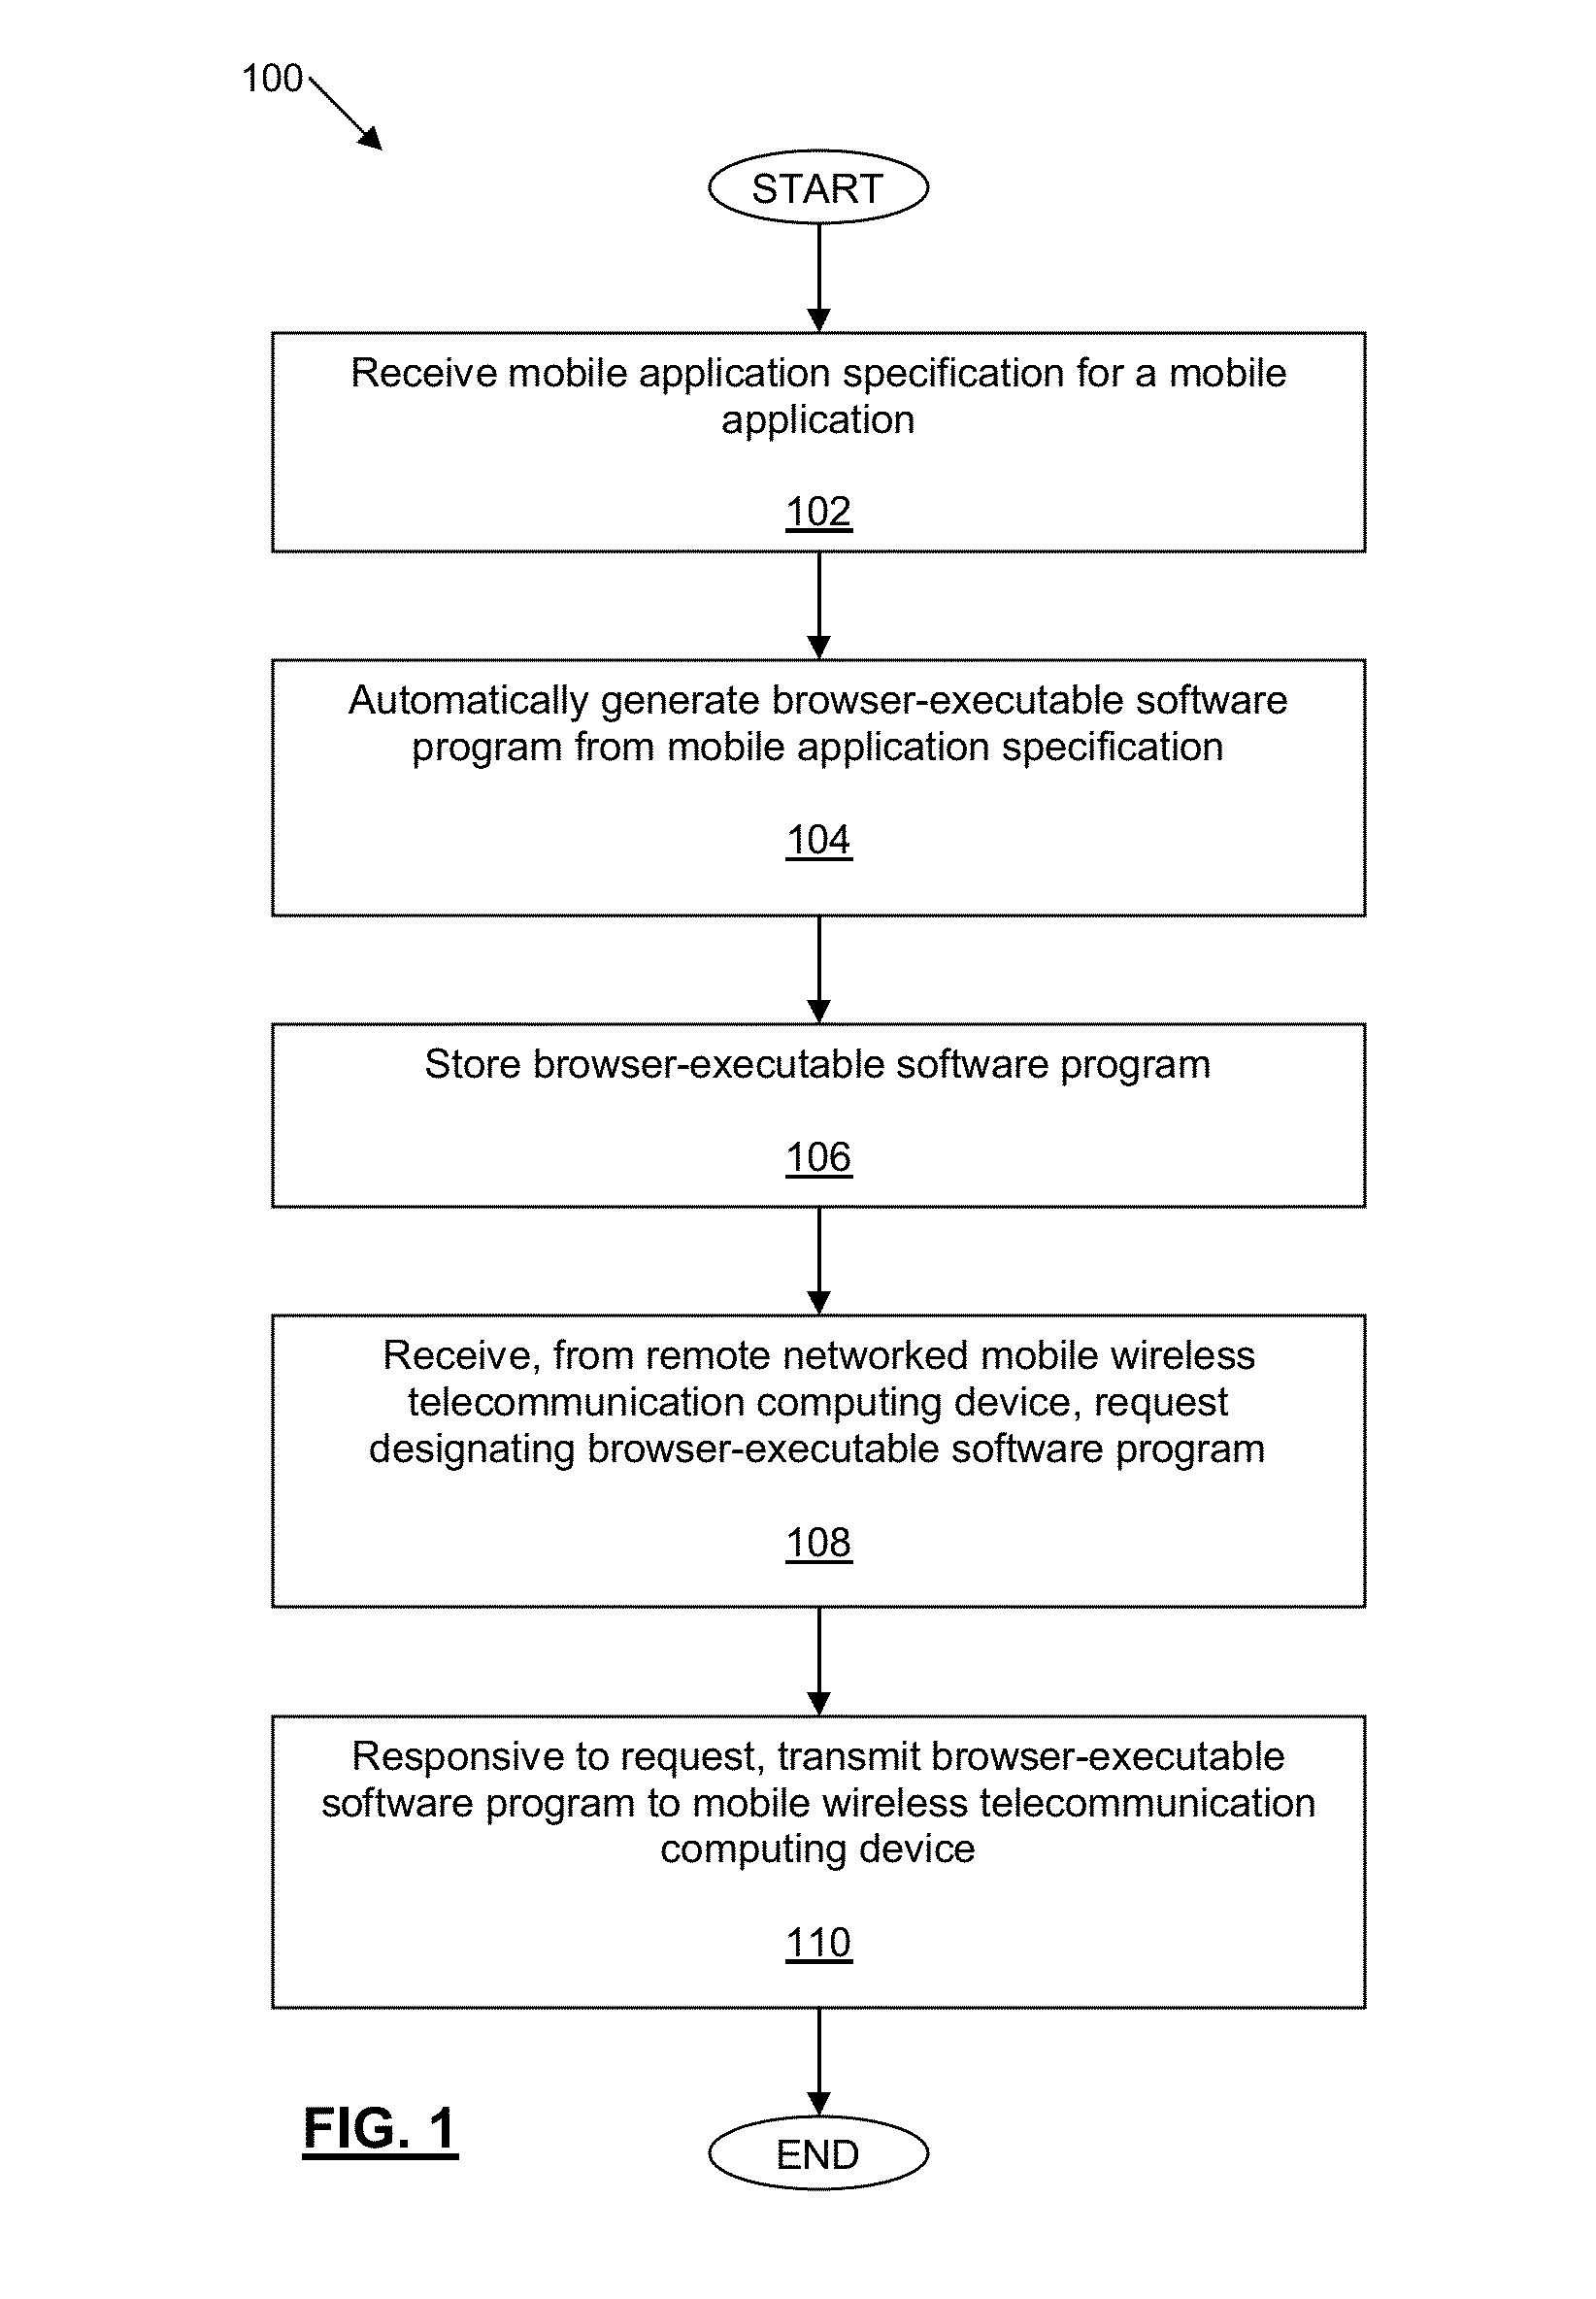 Executing a populated code template to generate a browser-executable software program to present a web page as a mobile application